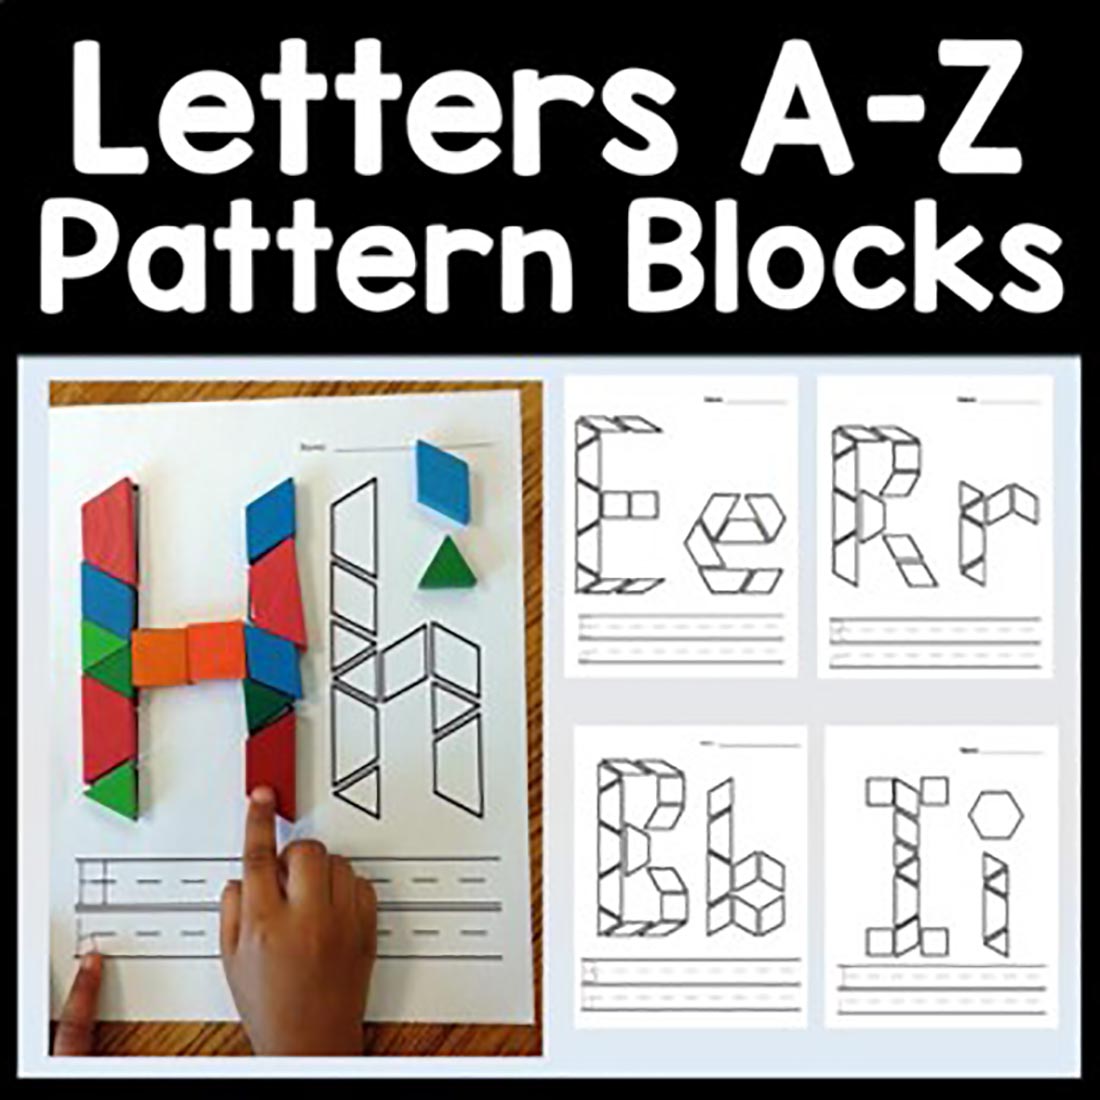 Printables for Kindergarten or Preschool with Math Pattern Blocks preview image.